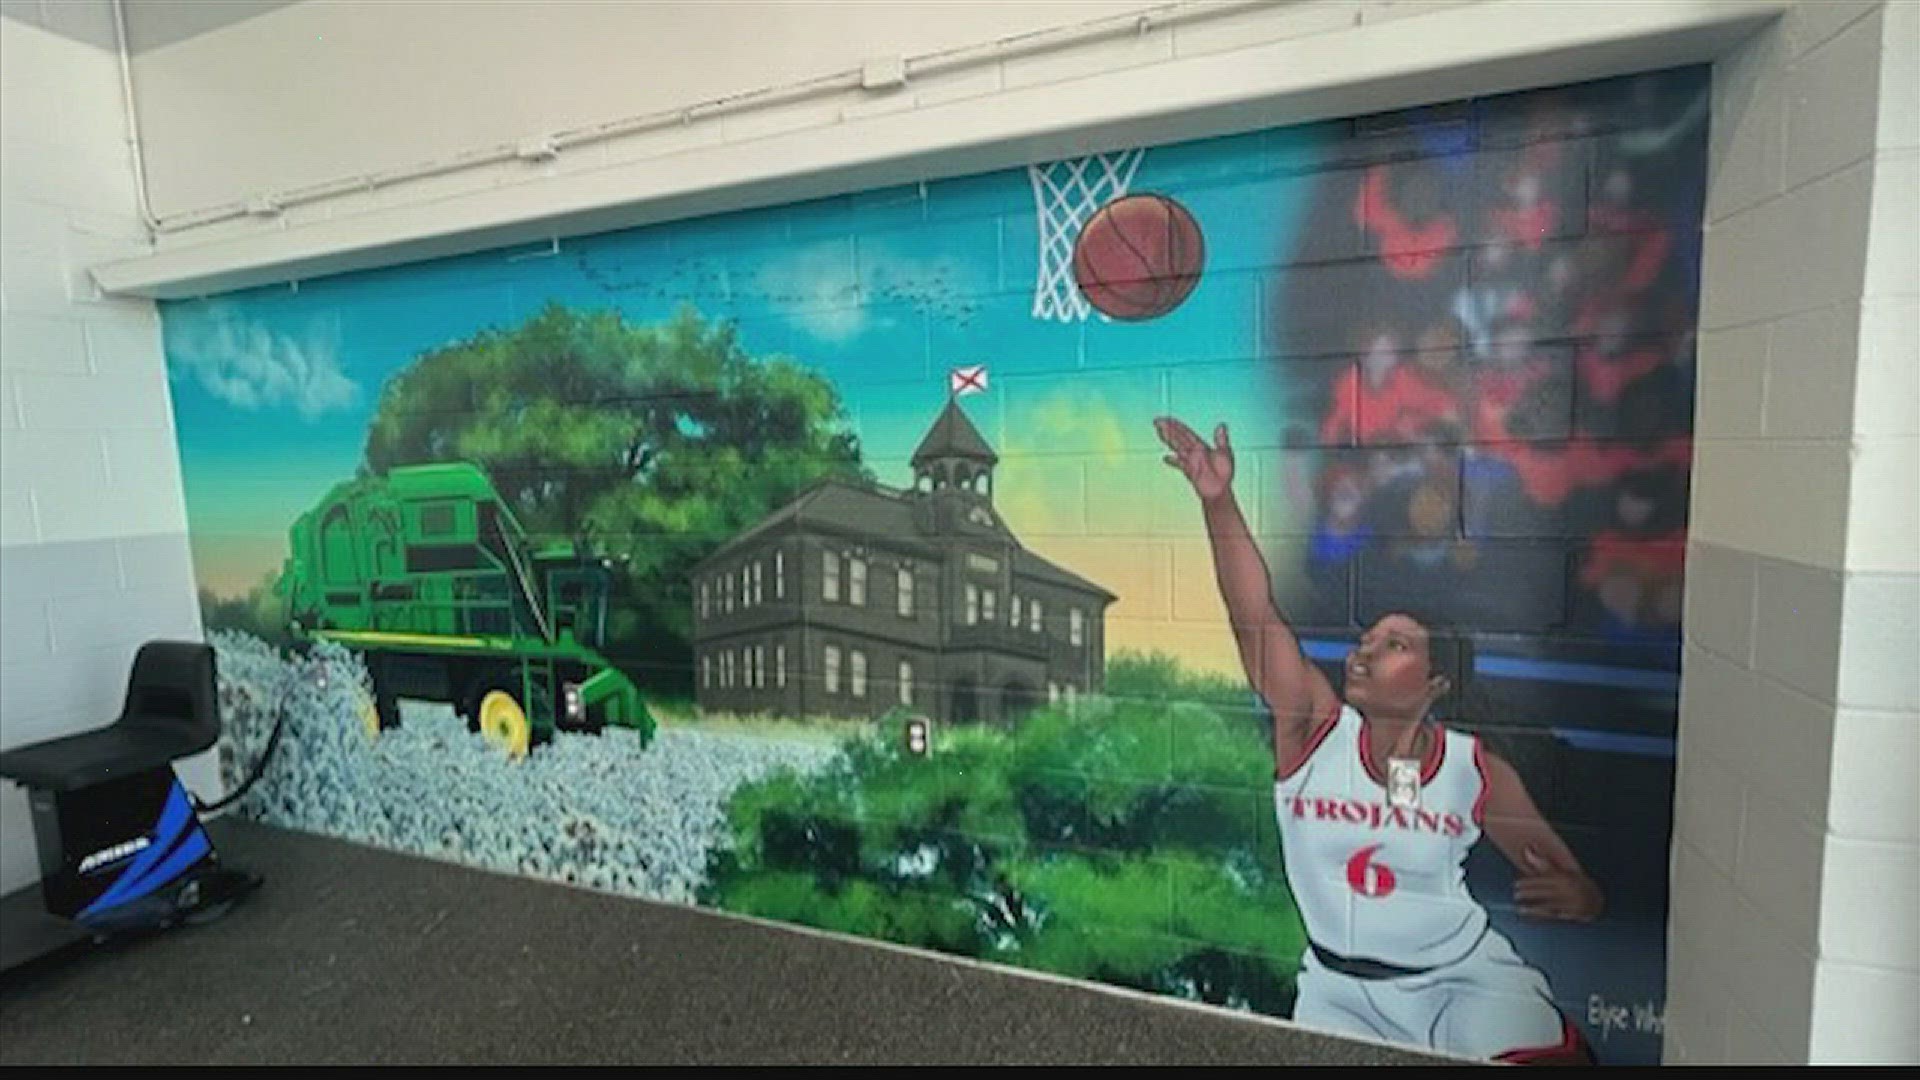 A mural at the Hazel Green, Alabama Walmart shows a historical schoolhouse - from Hazel Green, Wisconsin.